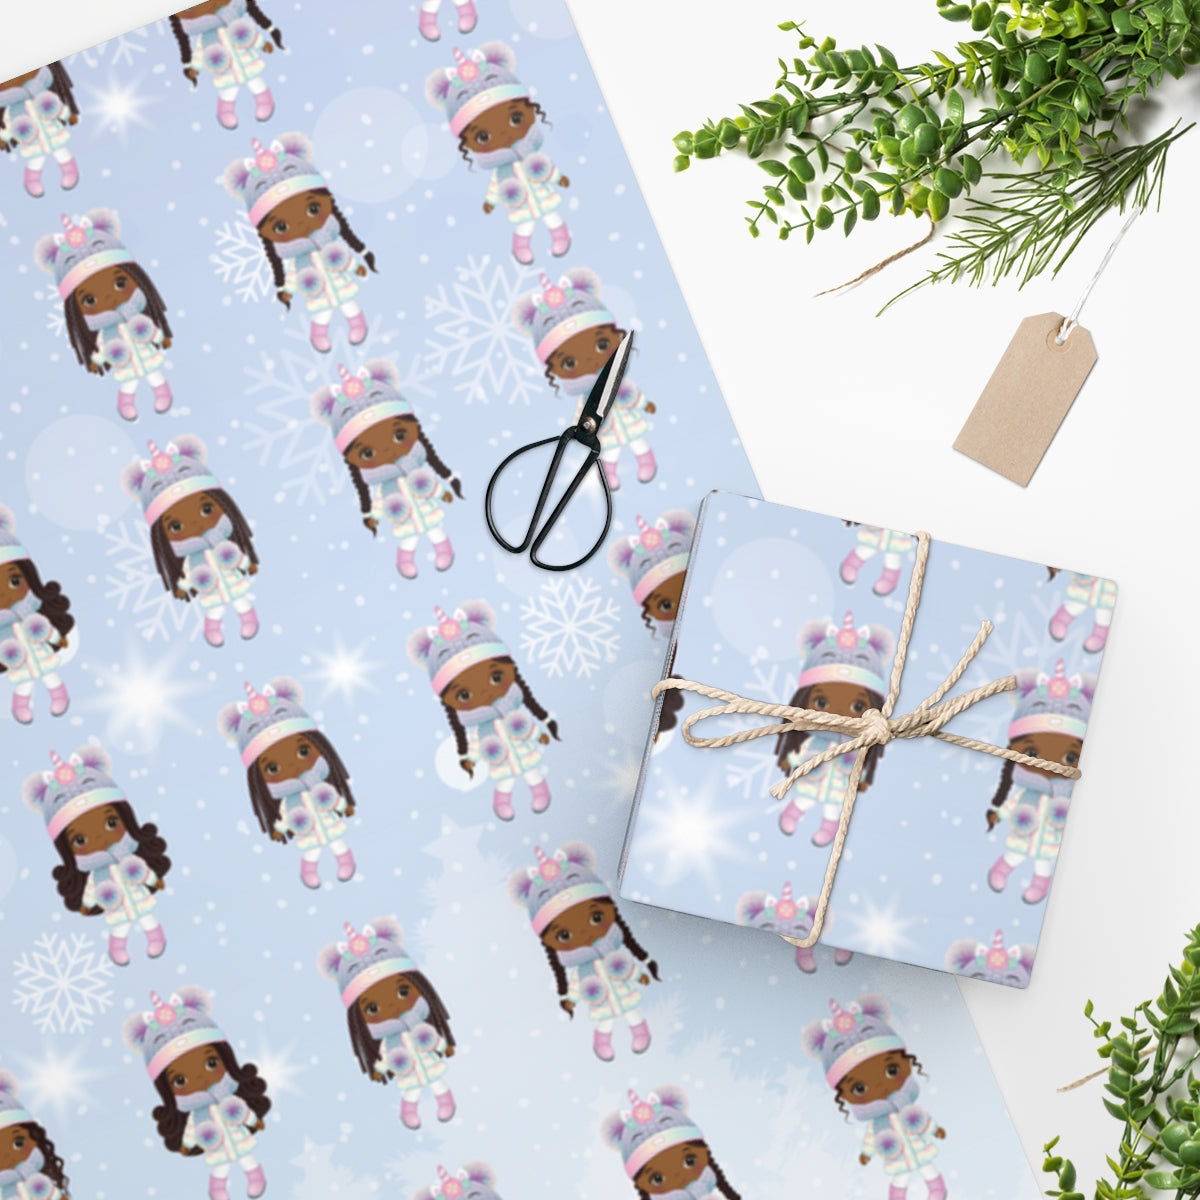 Beautiful Little Black Girls - Wrapping Paper